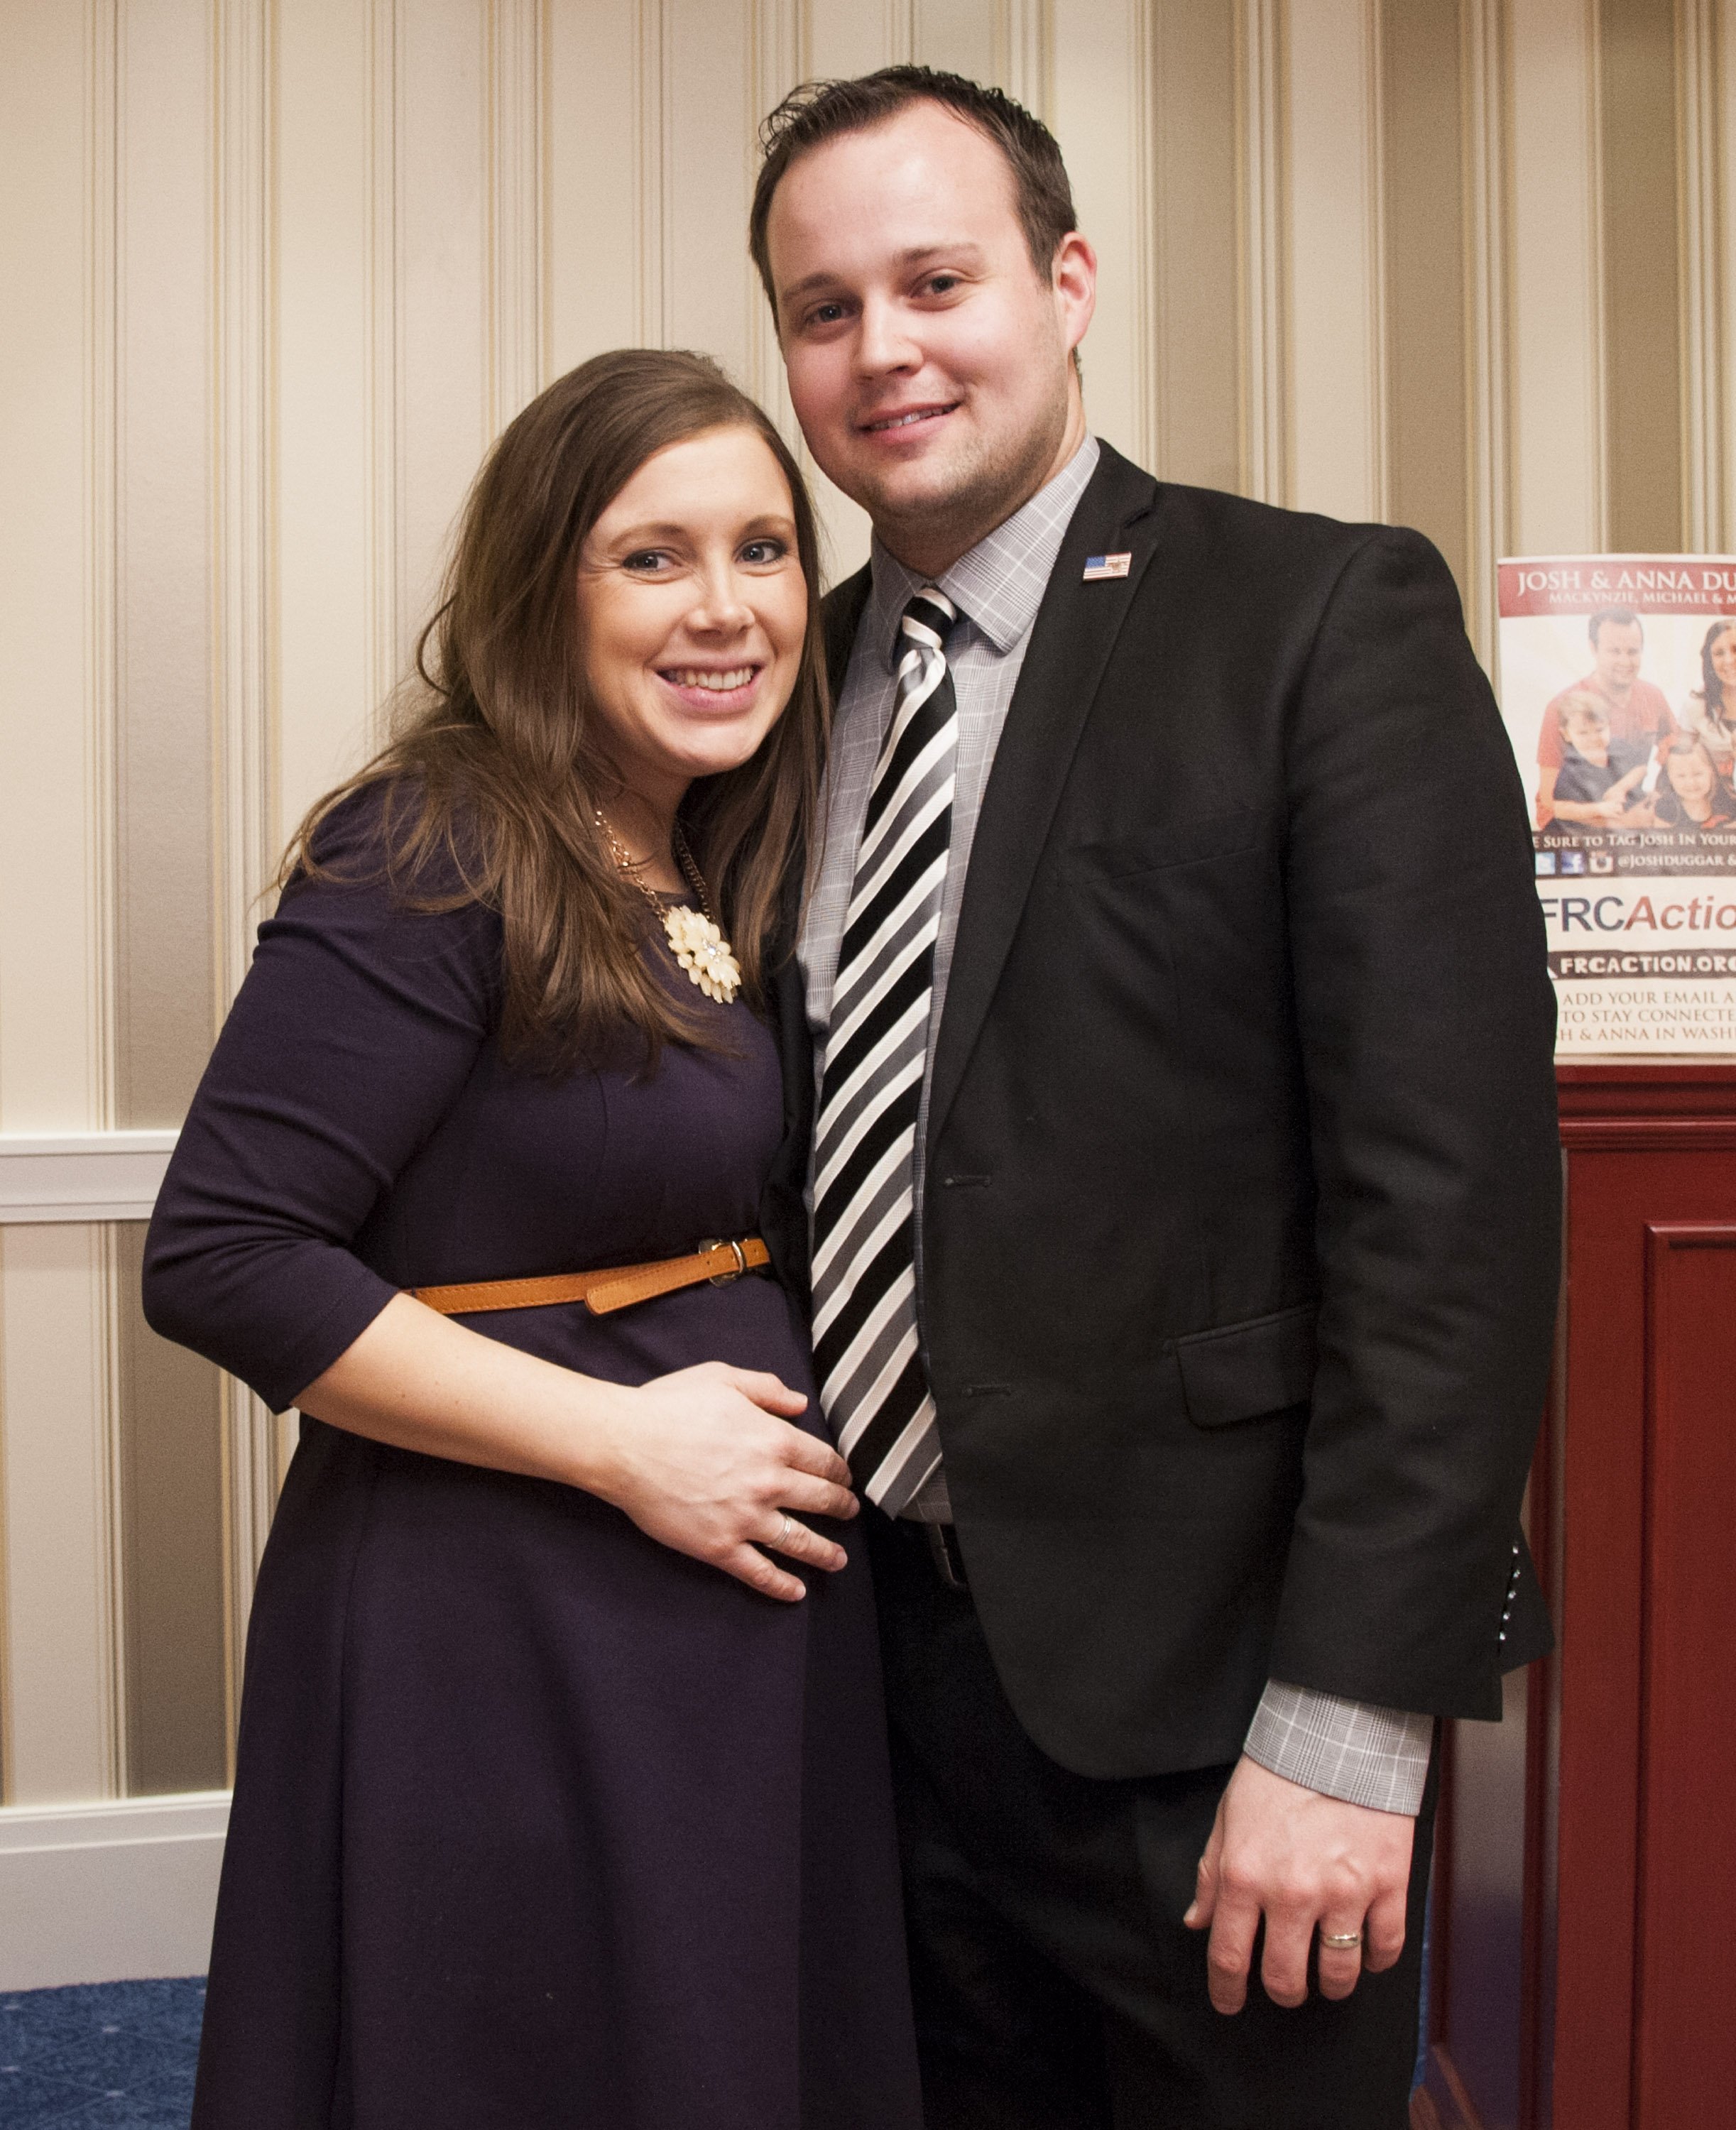 Anna Duggar and Josh Duggar pose during the 42nd annual Conservative Political Action Conference (CPAC) at the Gaylord National Resort Hotel and Convention Center on February 28, 2015 in National Harbor, Maryland | Photo: Getty Images